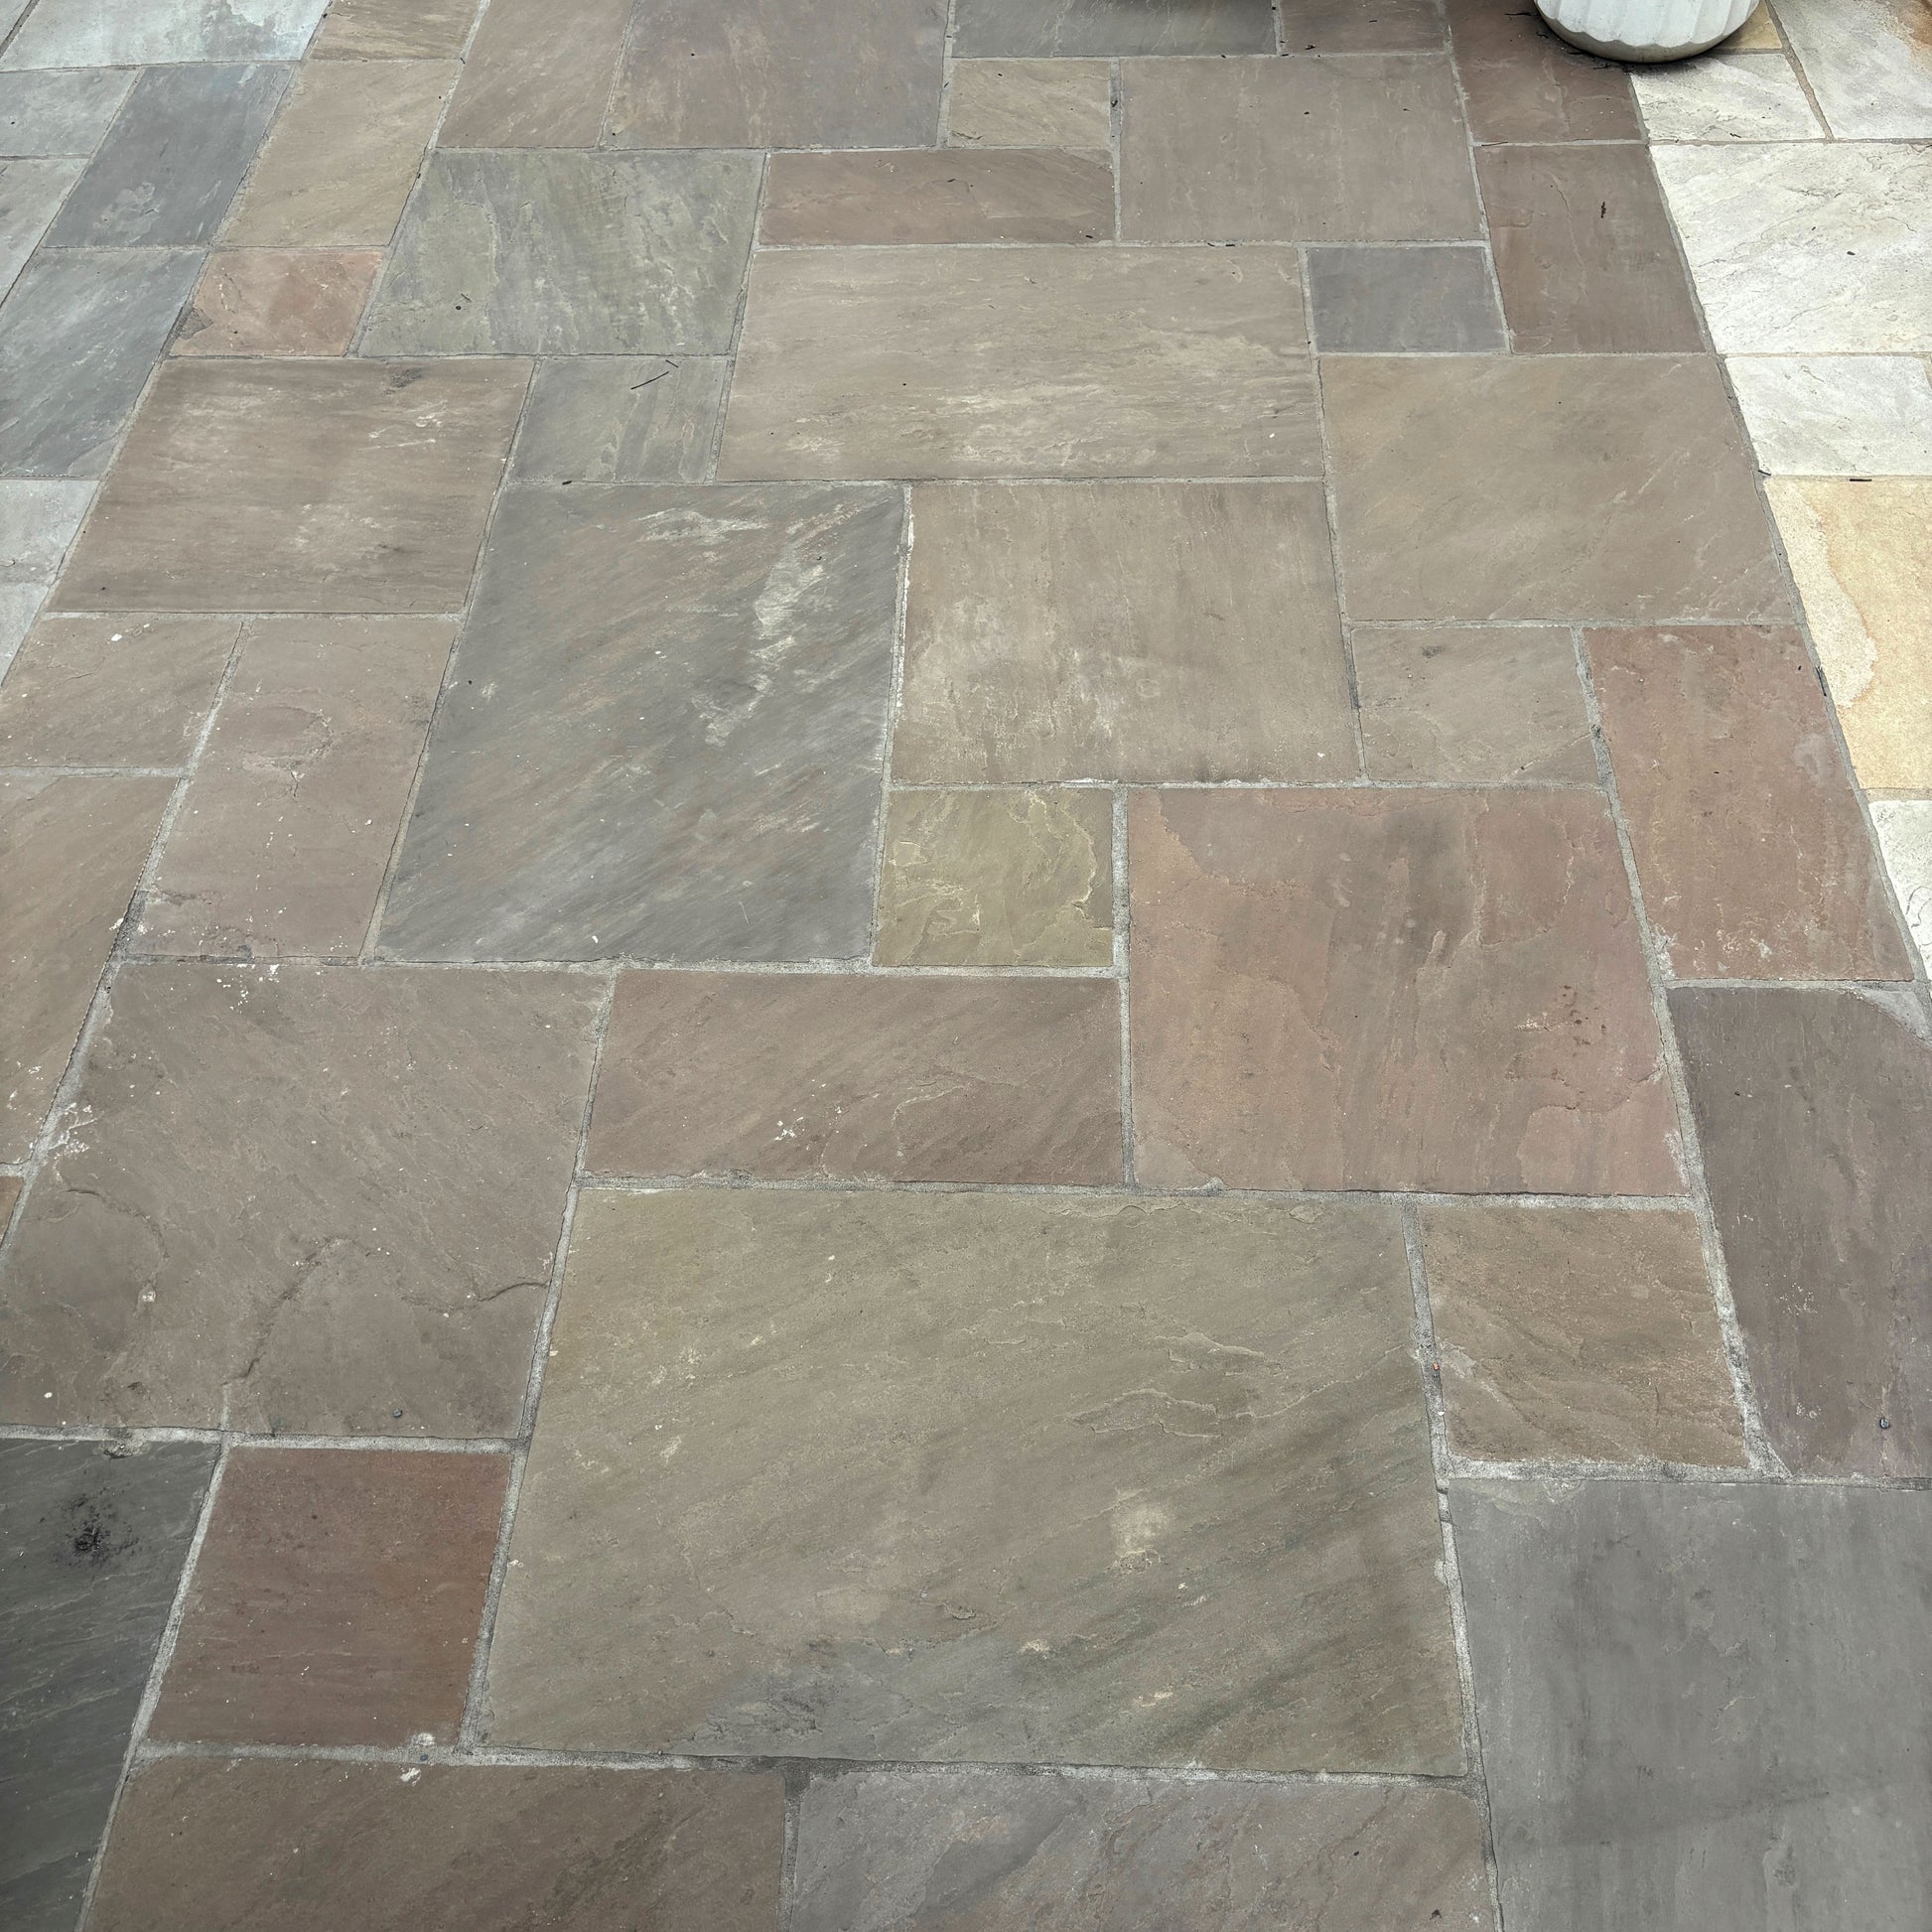 Raj Ochre Naturally Split Sandstone Patio Pack - 1st Quality - Outdoor inspiration - Available at iPave Natural Stone